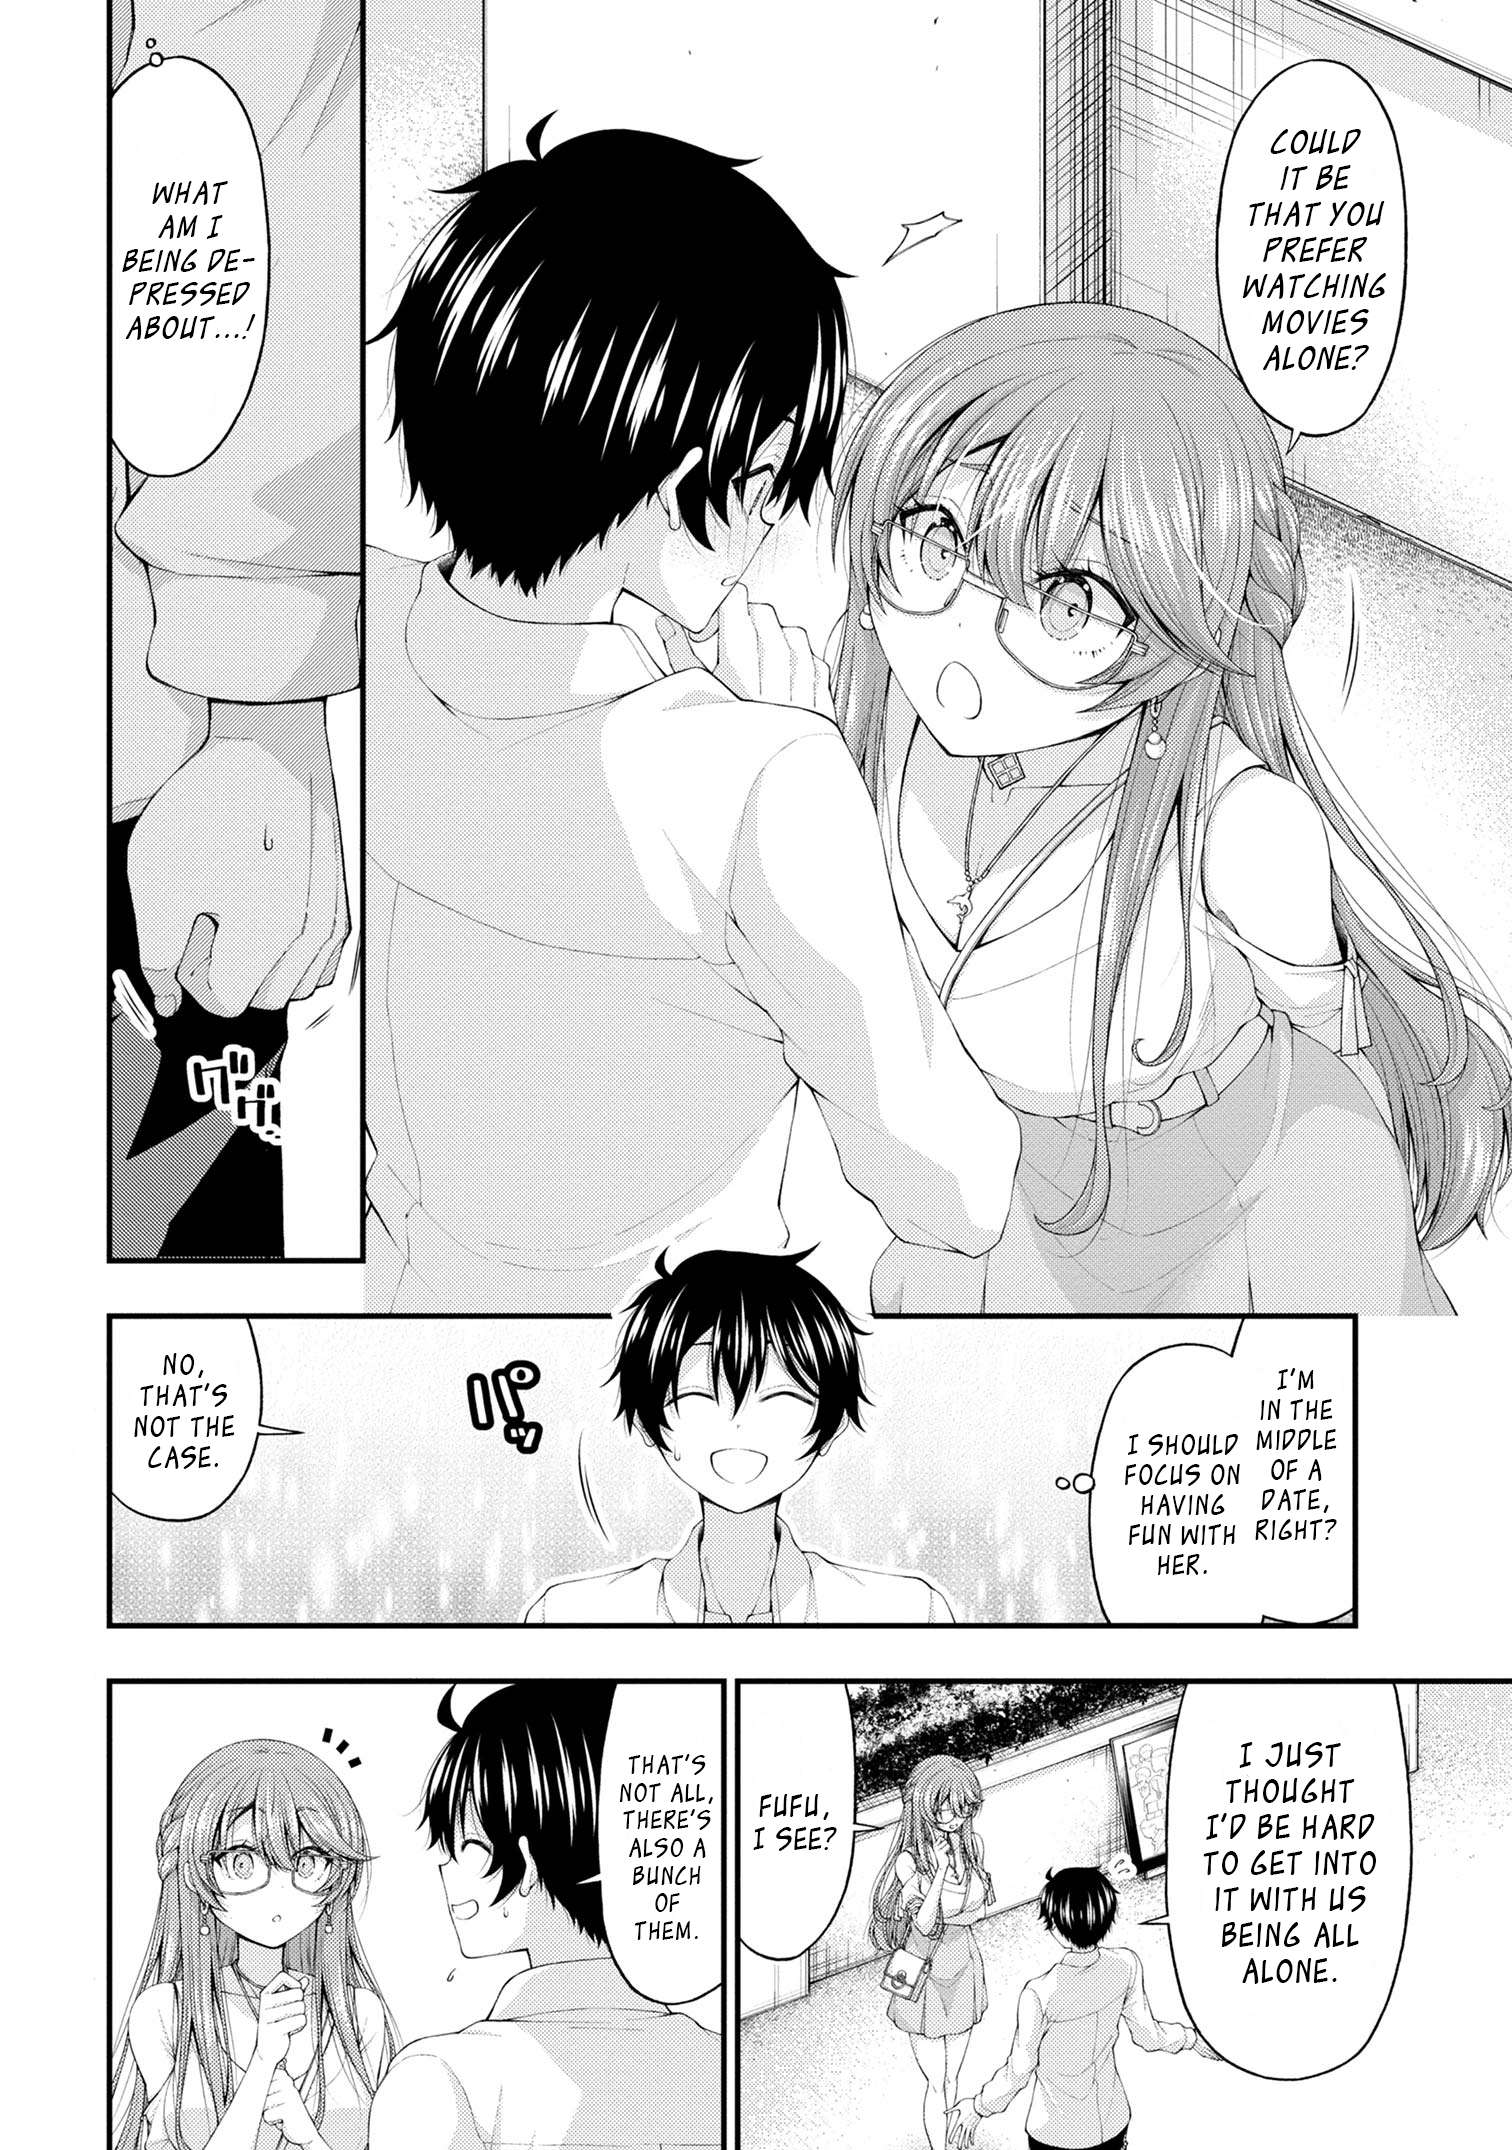 The Gal Who Was Meant to Confess to Me as a Game Punishment - chapter 10 - #6